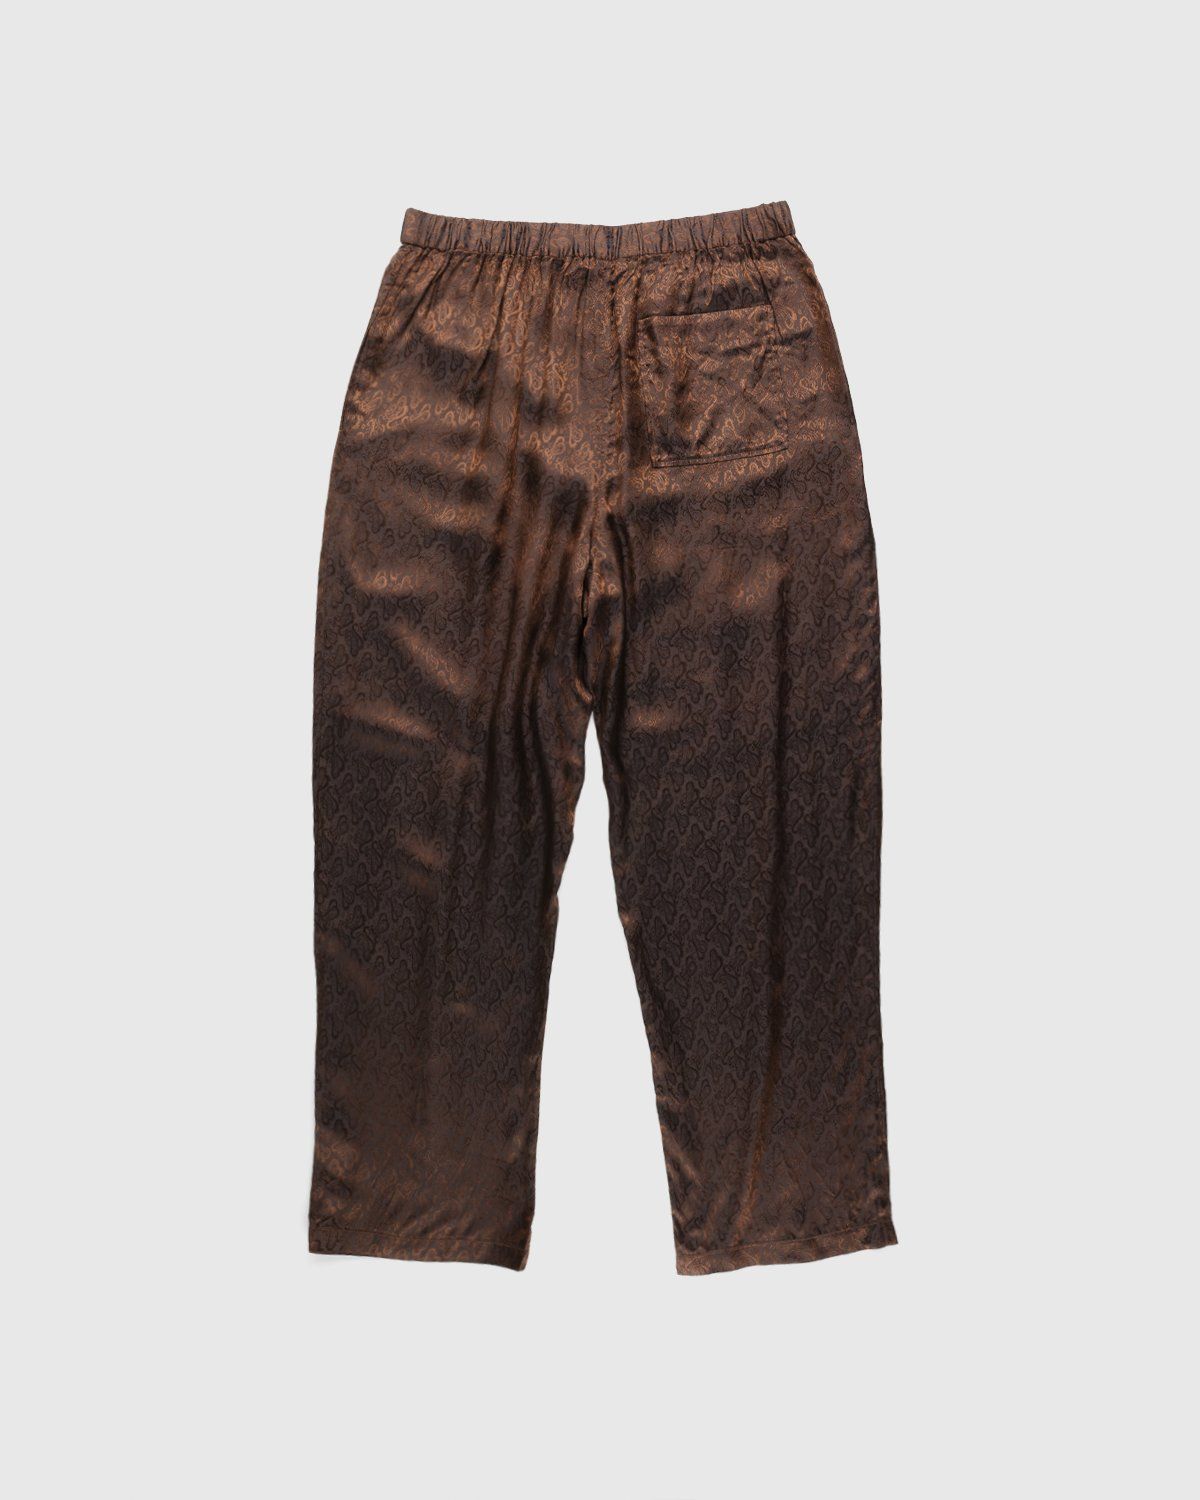 Acne Studios – Jacquard Trousers Brown - Trousers - Brown - Image 2